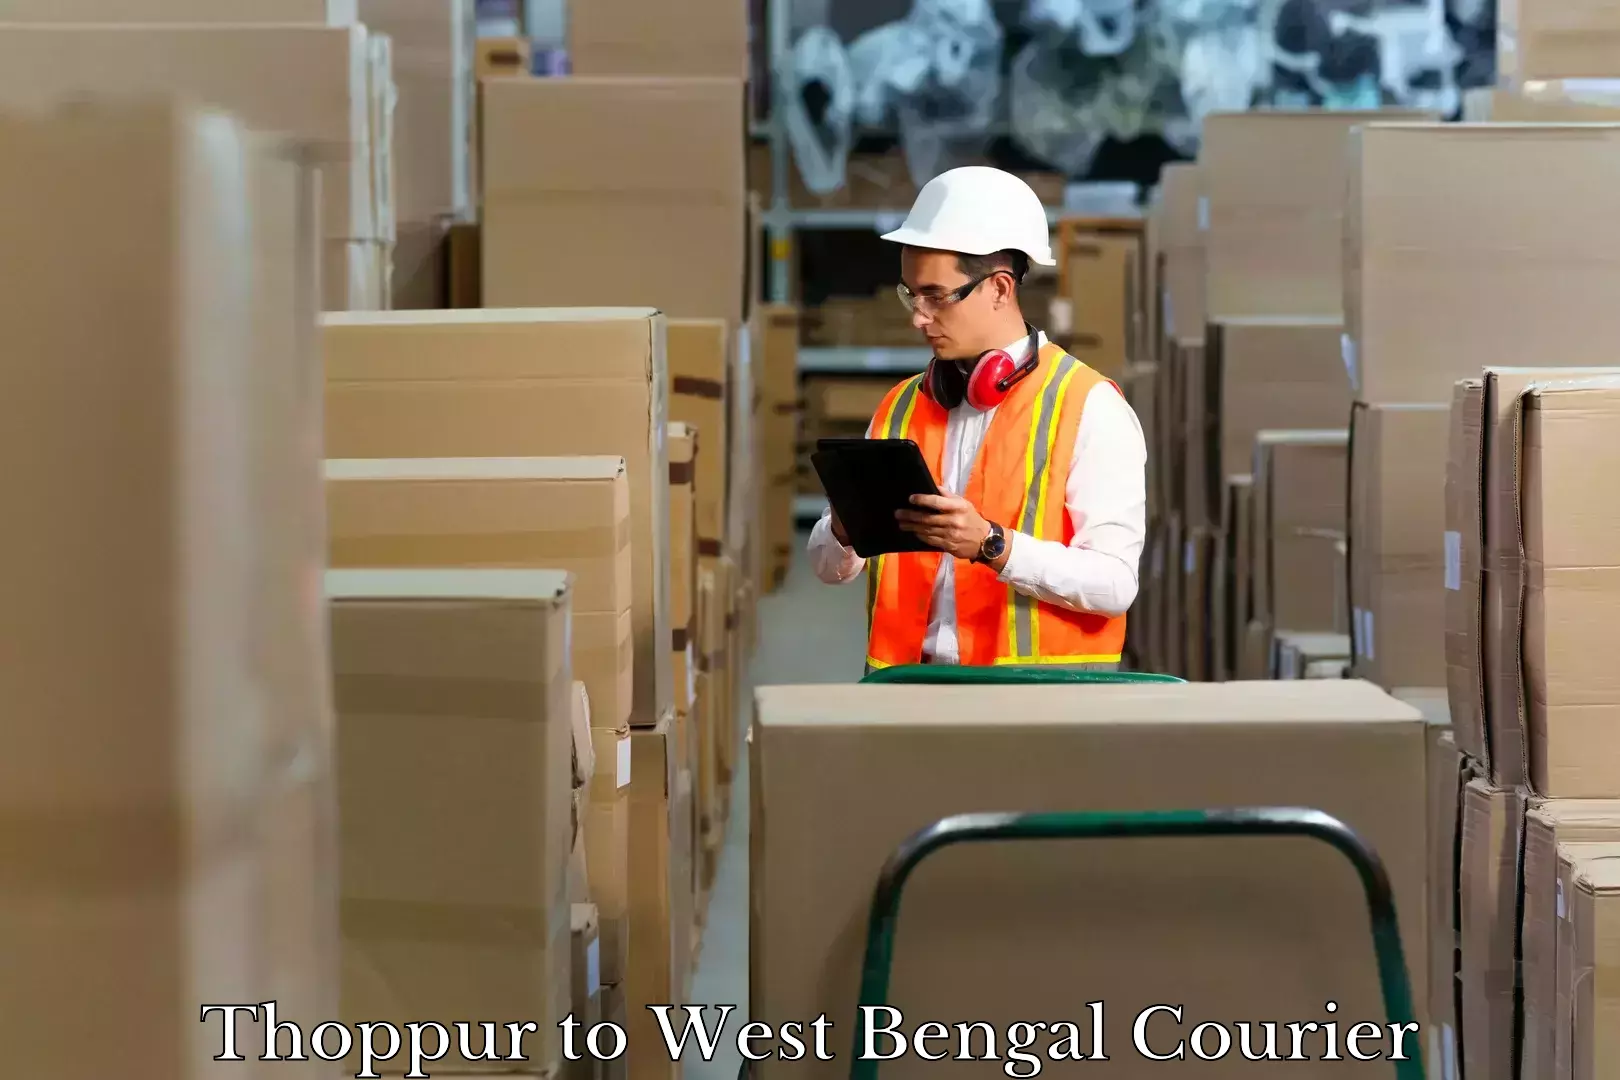 Luggage shipment specialists Thoppur to West Bengal